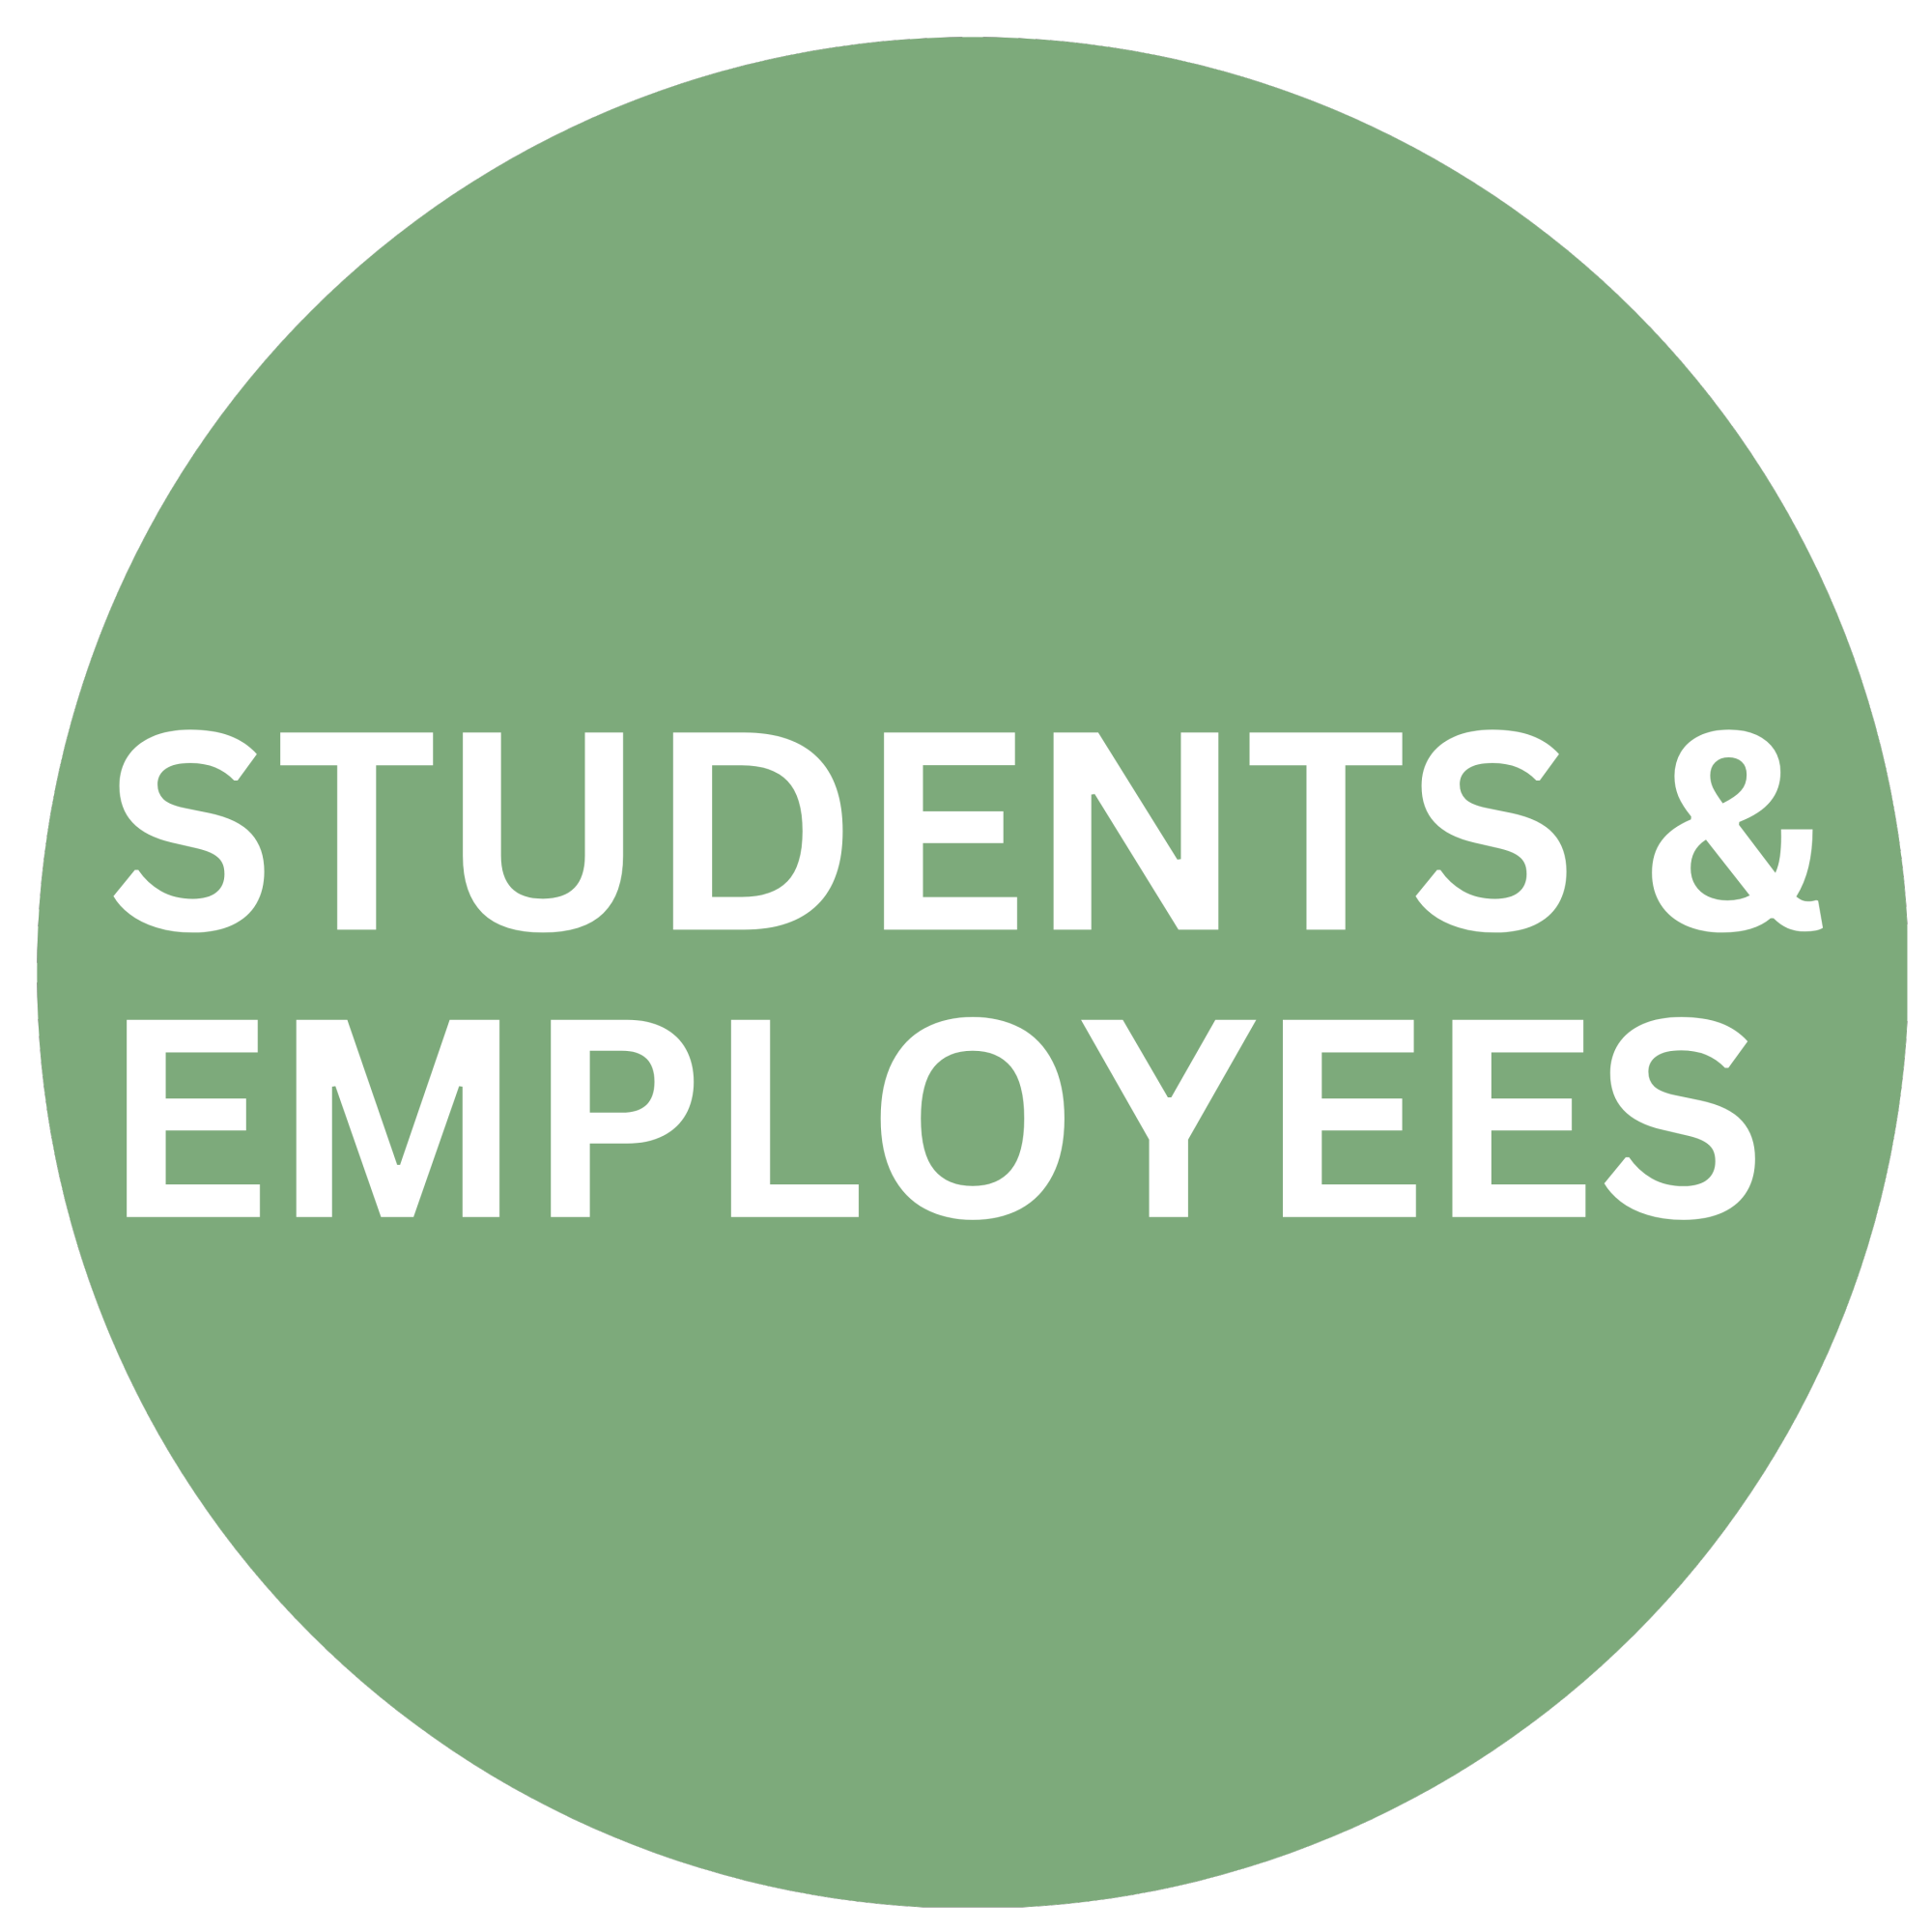 Students and employees welcome